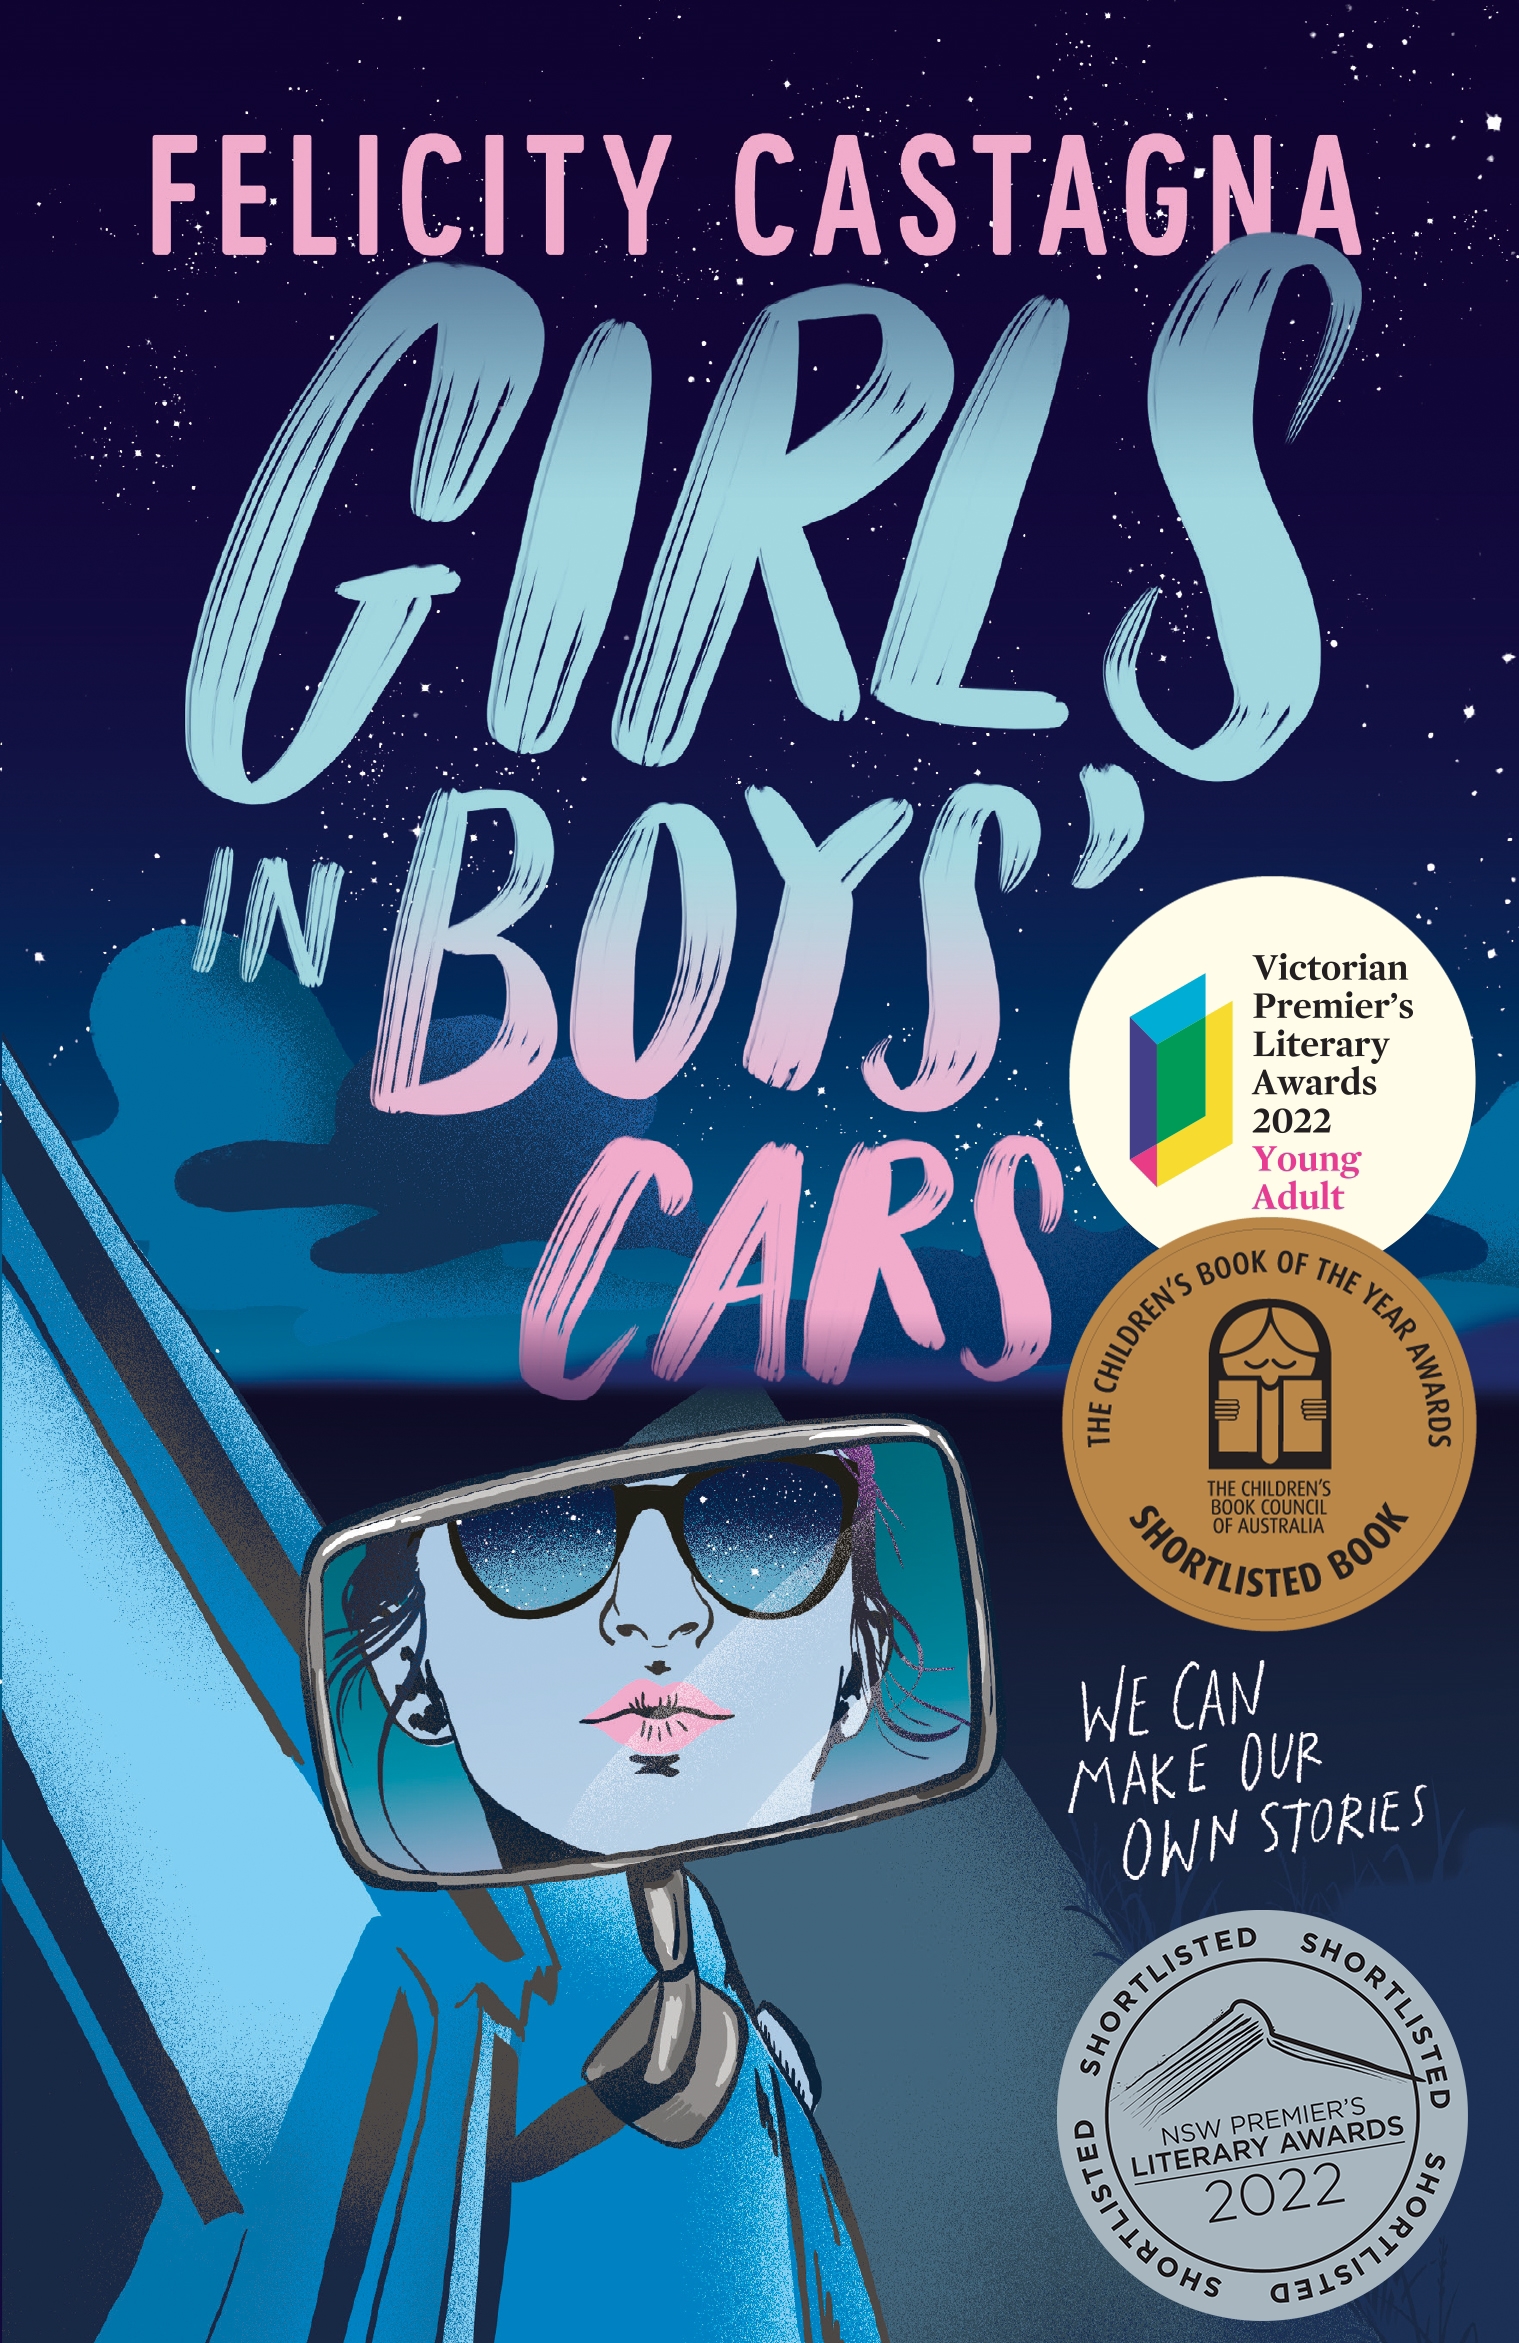 Cover of Girls in Boys' Cars by Felicity Castagna. It's an illustration of a girl with sunglasses in the driver's seat pouting into the side mirror.